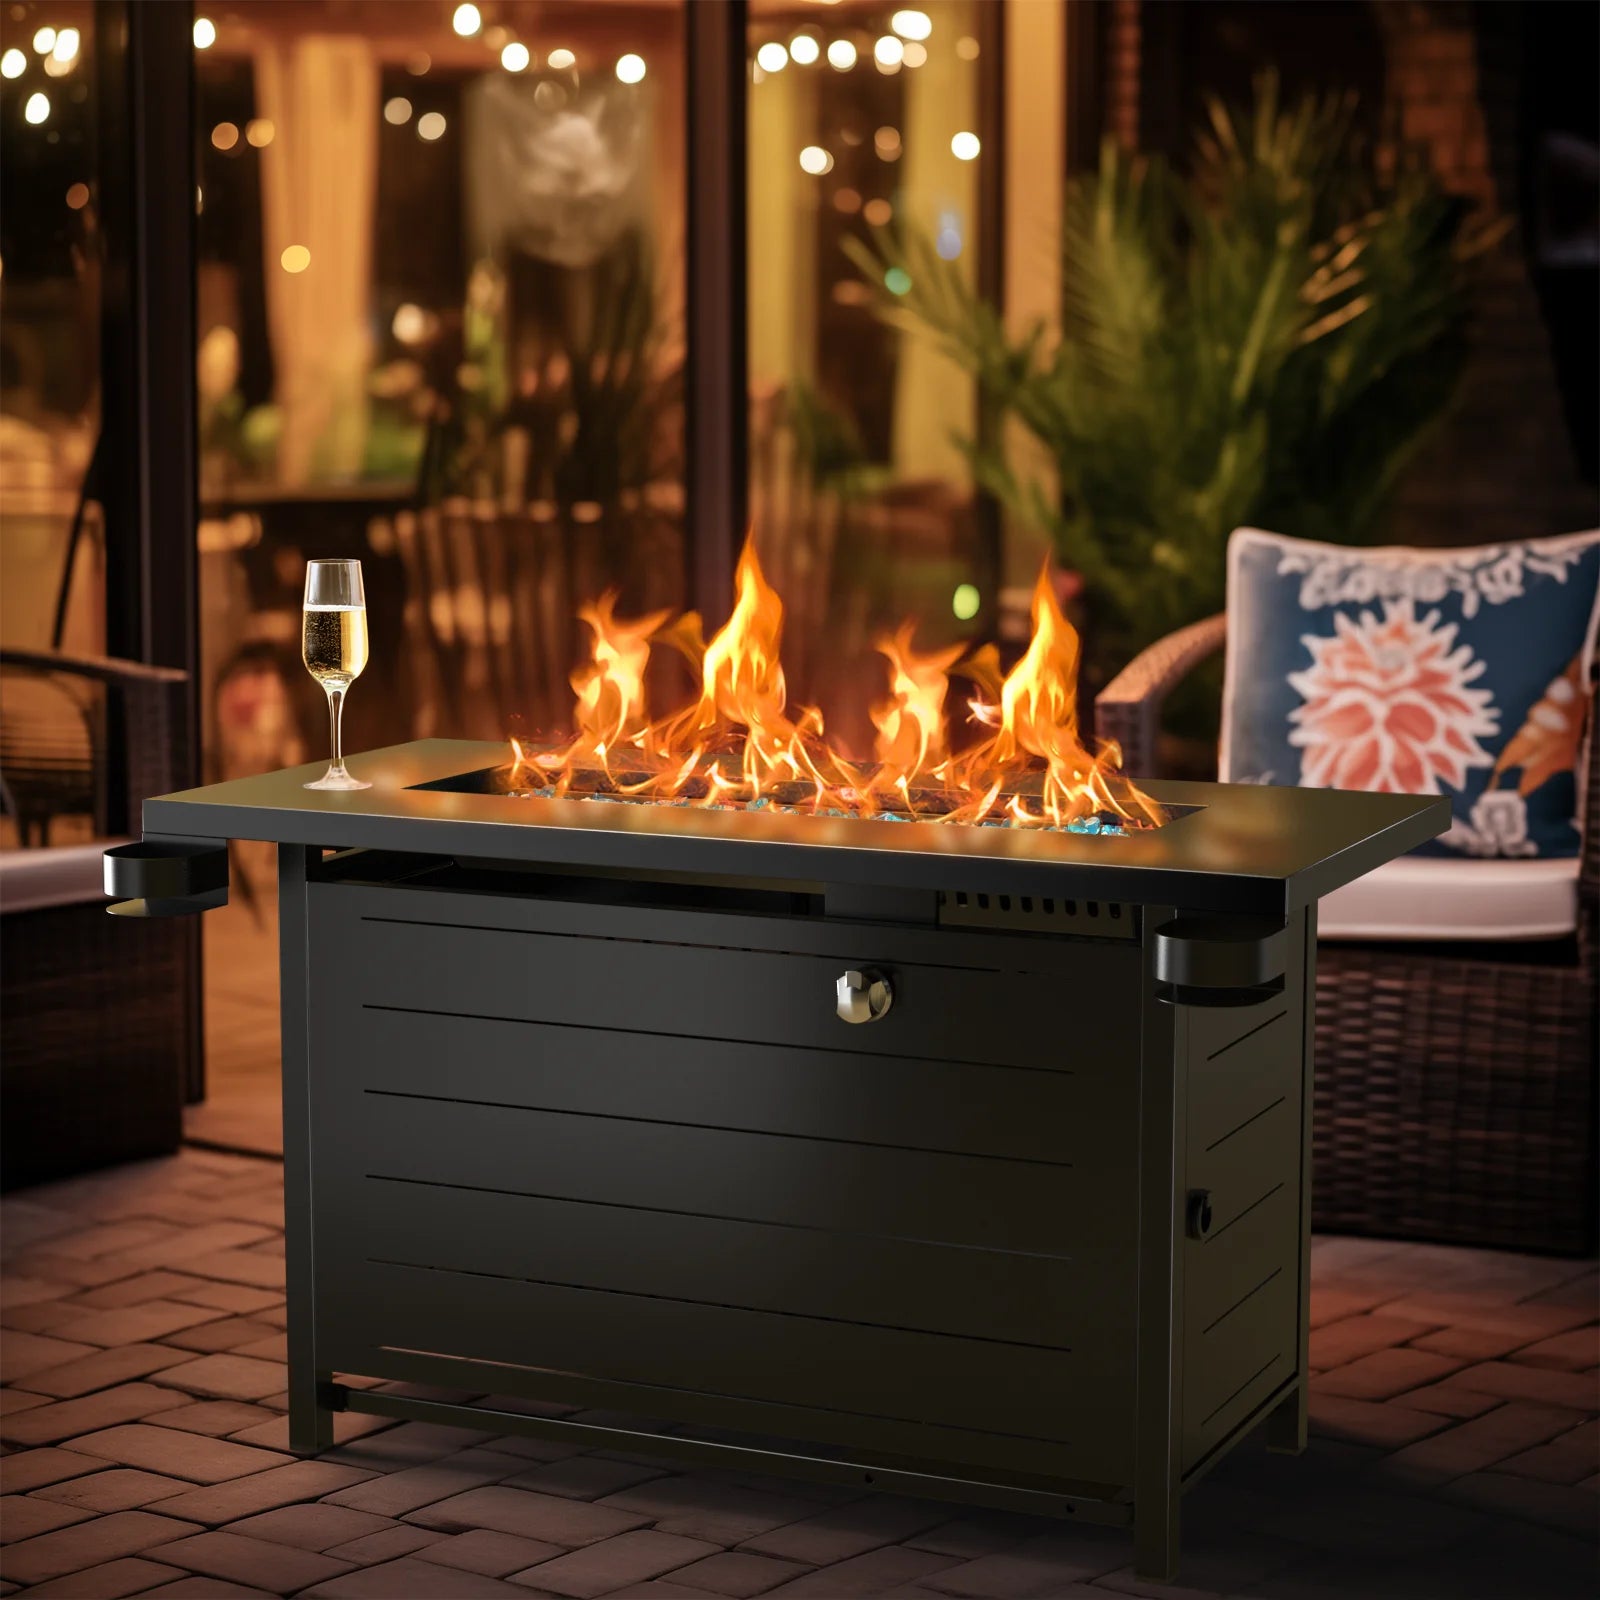 43" Propane Fire Pits for outside 60,000 BTU Gas Fire Pit Table for outside with Lid , Glass Beads, Cup Holders, Hanging Shelf & Nylon Cover, Rectangle